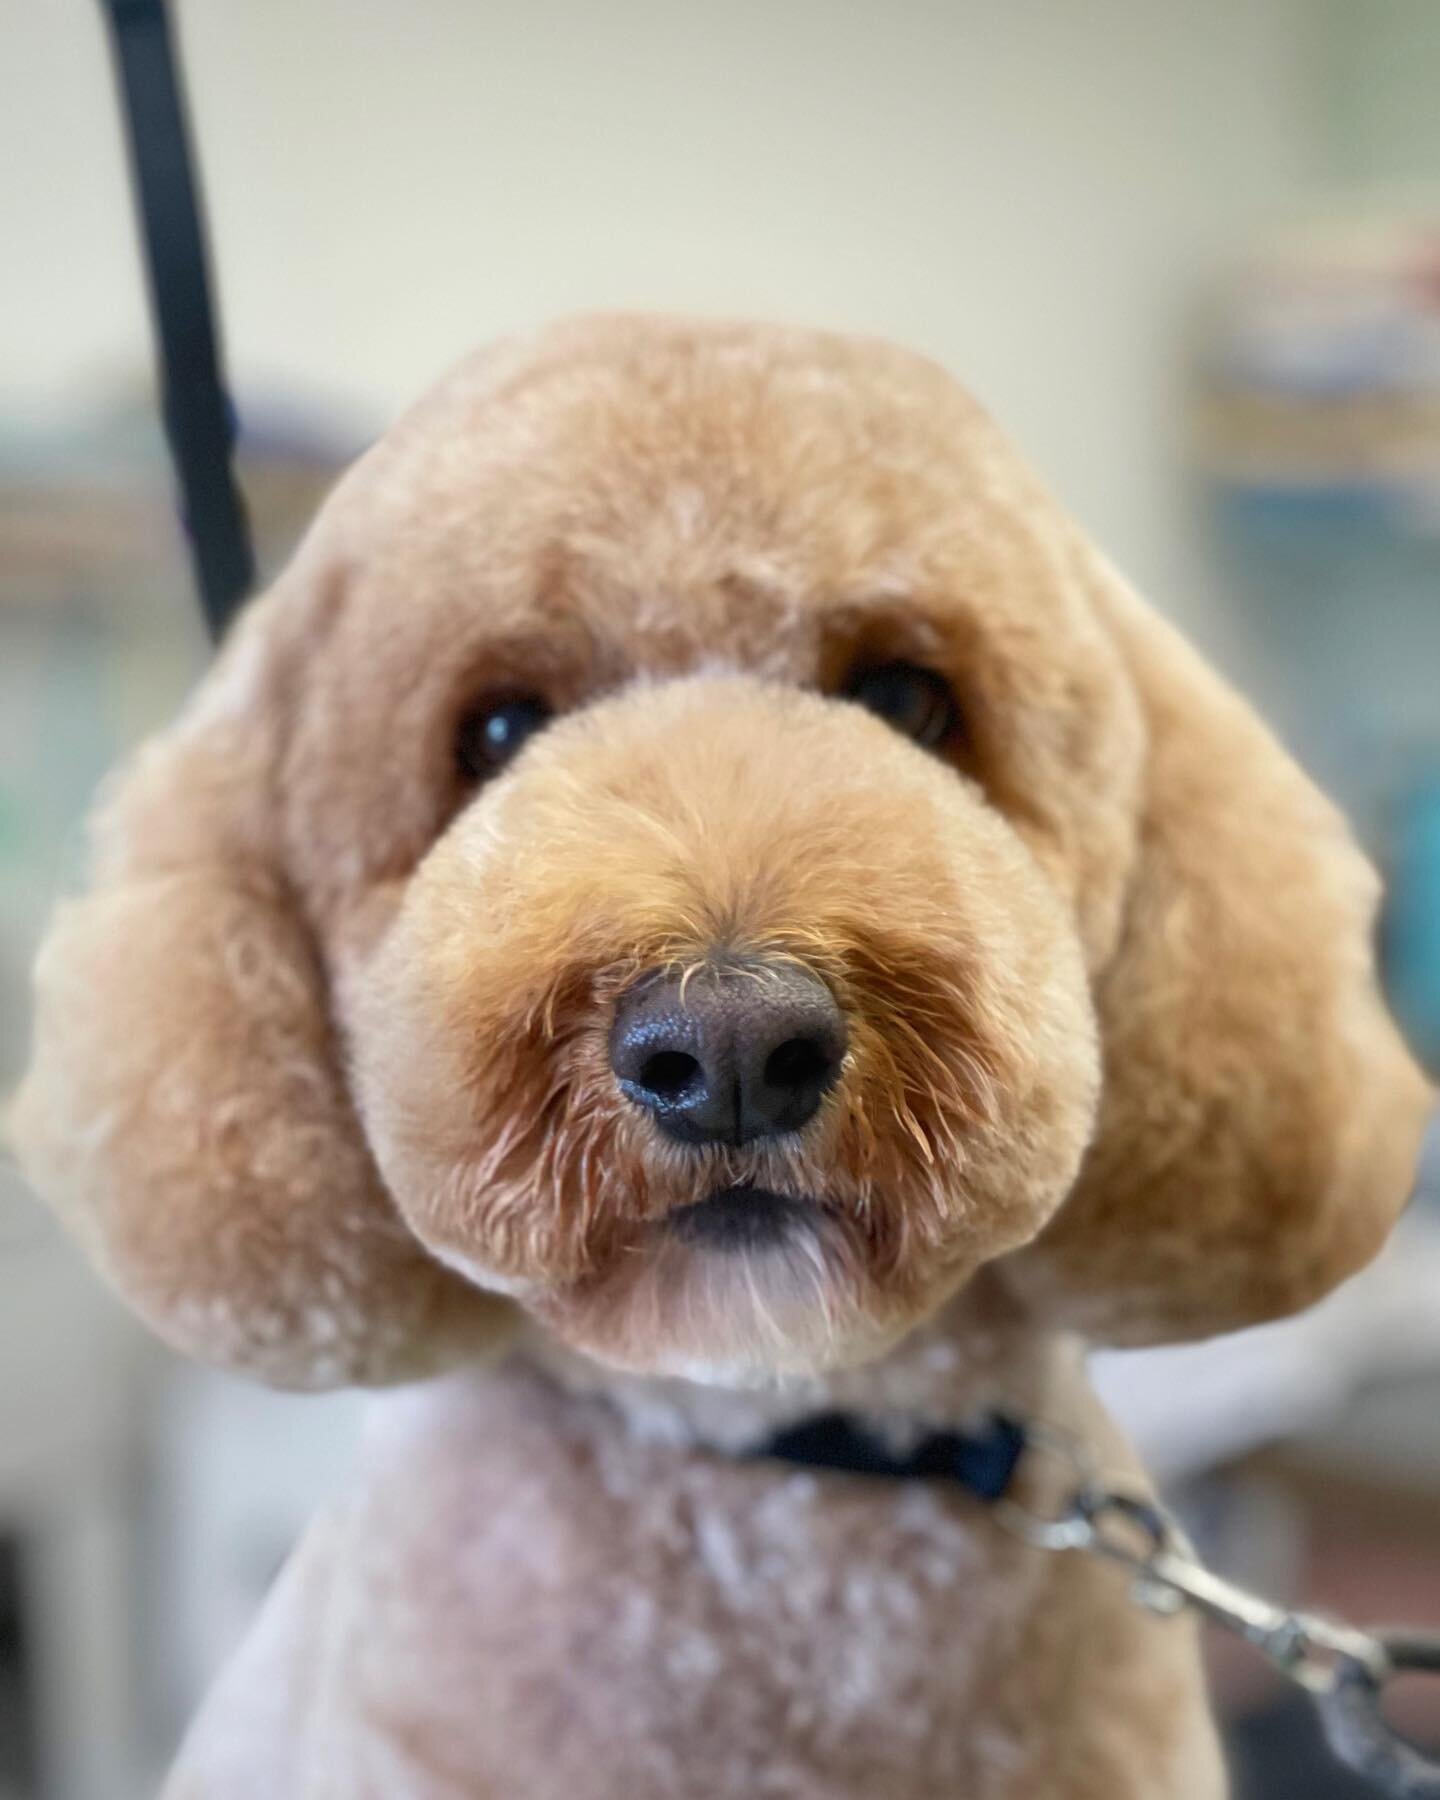 Isn&rsquo;t Rollo the cutest?! Mary did a great job on his haircut today ❤️

#doodlesofinstagram #dogsofinstagram #doggroomersofig #doggrooming #sandiego #sandiegodogsofinstagram #sandiegodogs #sandiegogroomers